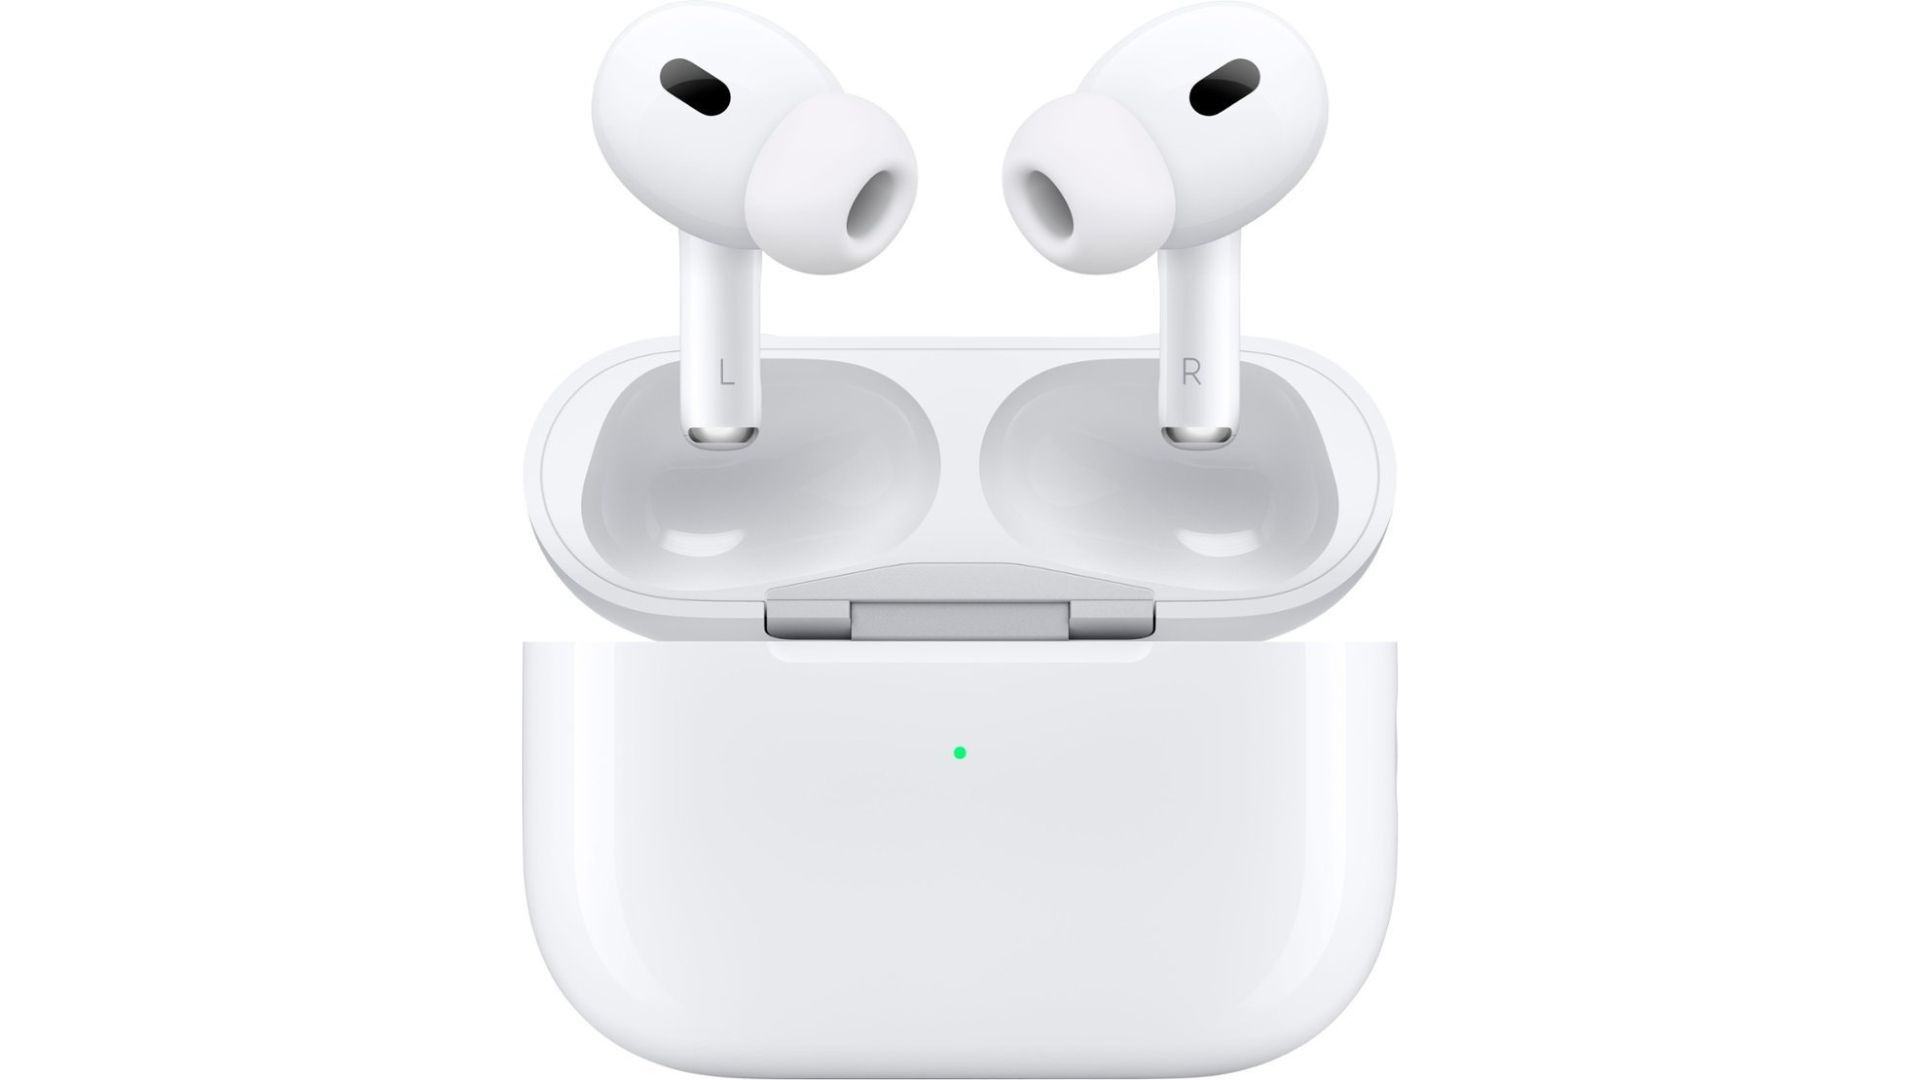 the Apple Airpods Pro 2 with charging case